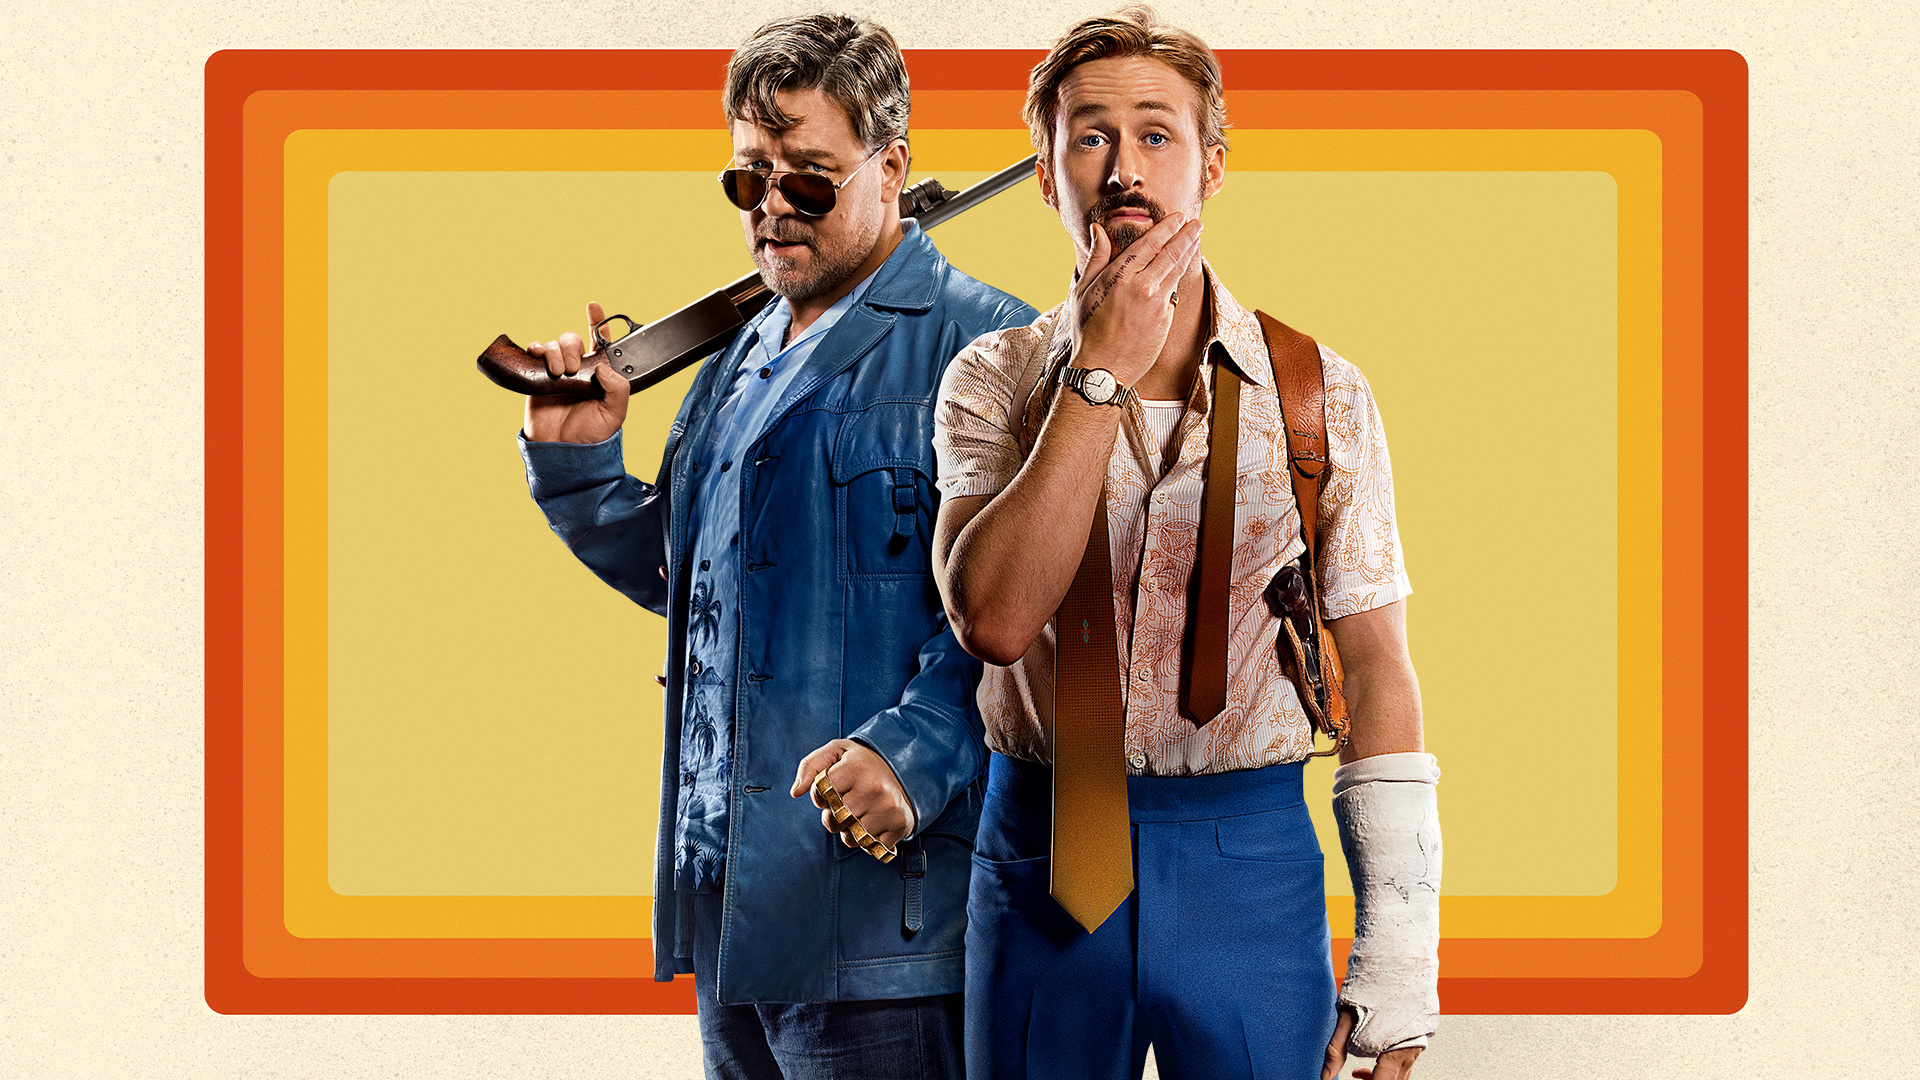 Ryan Gosling: Starred in the black comedy The Nice Guys, opposite Russell Crowe. 1920x1080 Full HD Background.